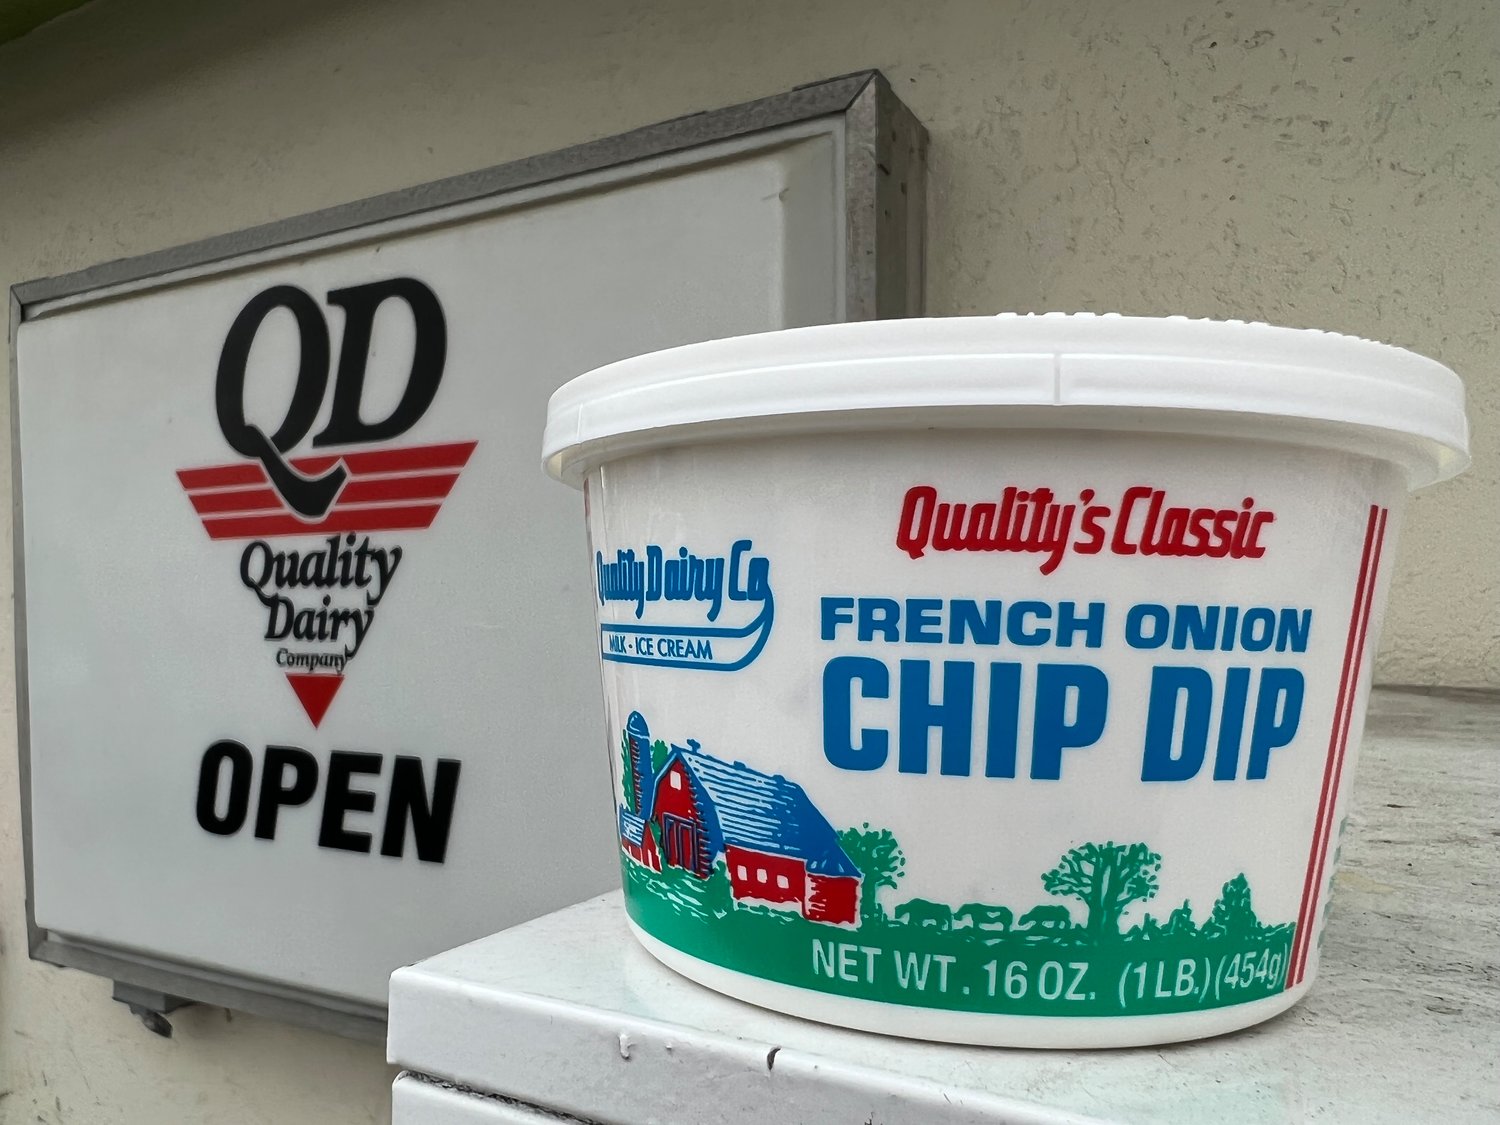 Quality Dairy CEO Ken Martin took to social media this week to bust some myths about his french onion chip dip. It hasn't changed in decades, he said.